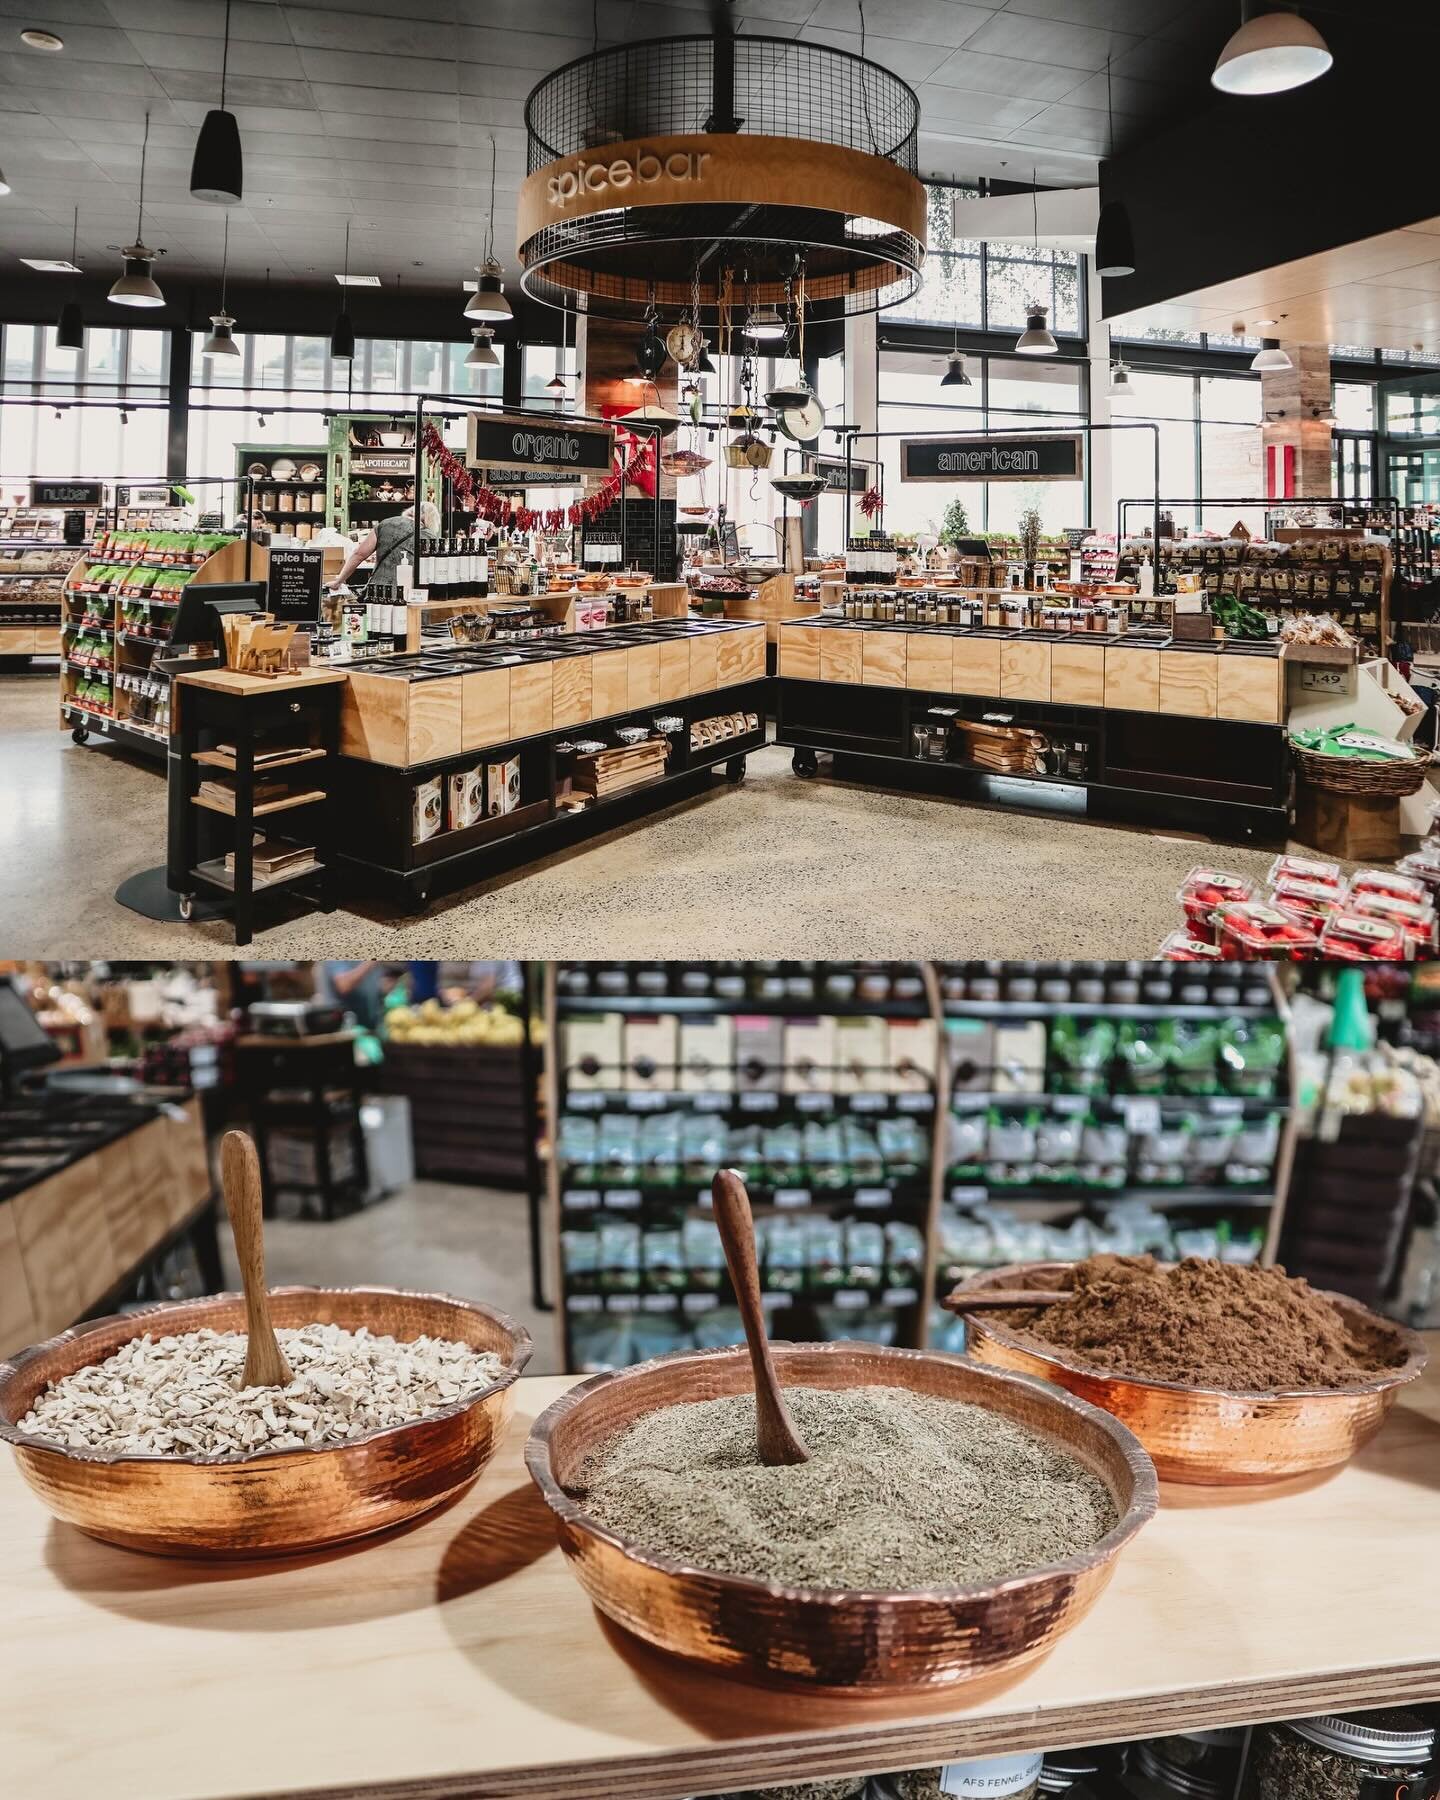 The continued love for Foodland Pasadena&rsquo;s design and its recognition as the world&rsquo;s finest supermarket is a testament to the outstanding work of @anthonyciroccodesign . A well-deserved honor for both design and functionality.
@adelaidefi